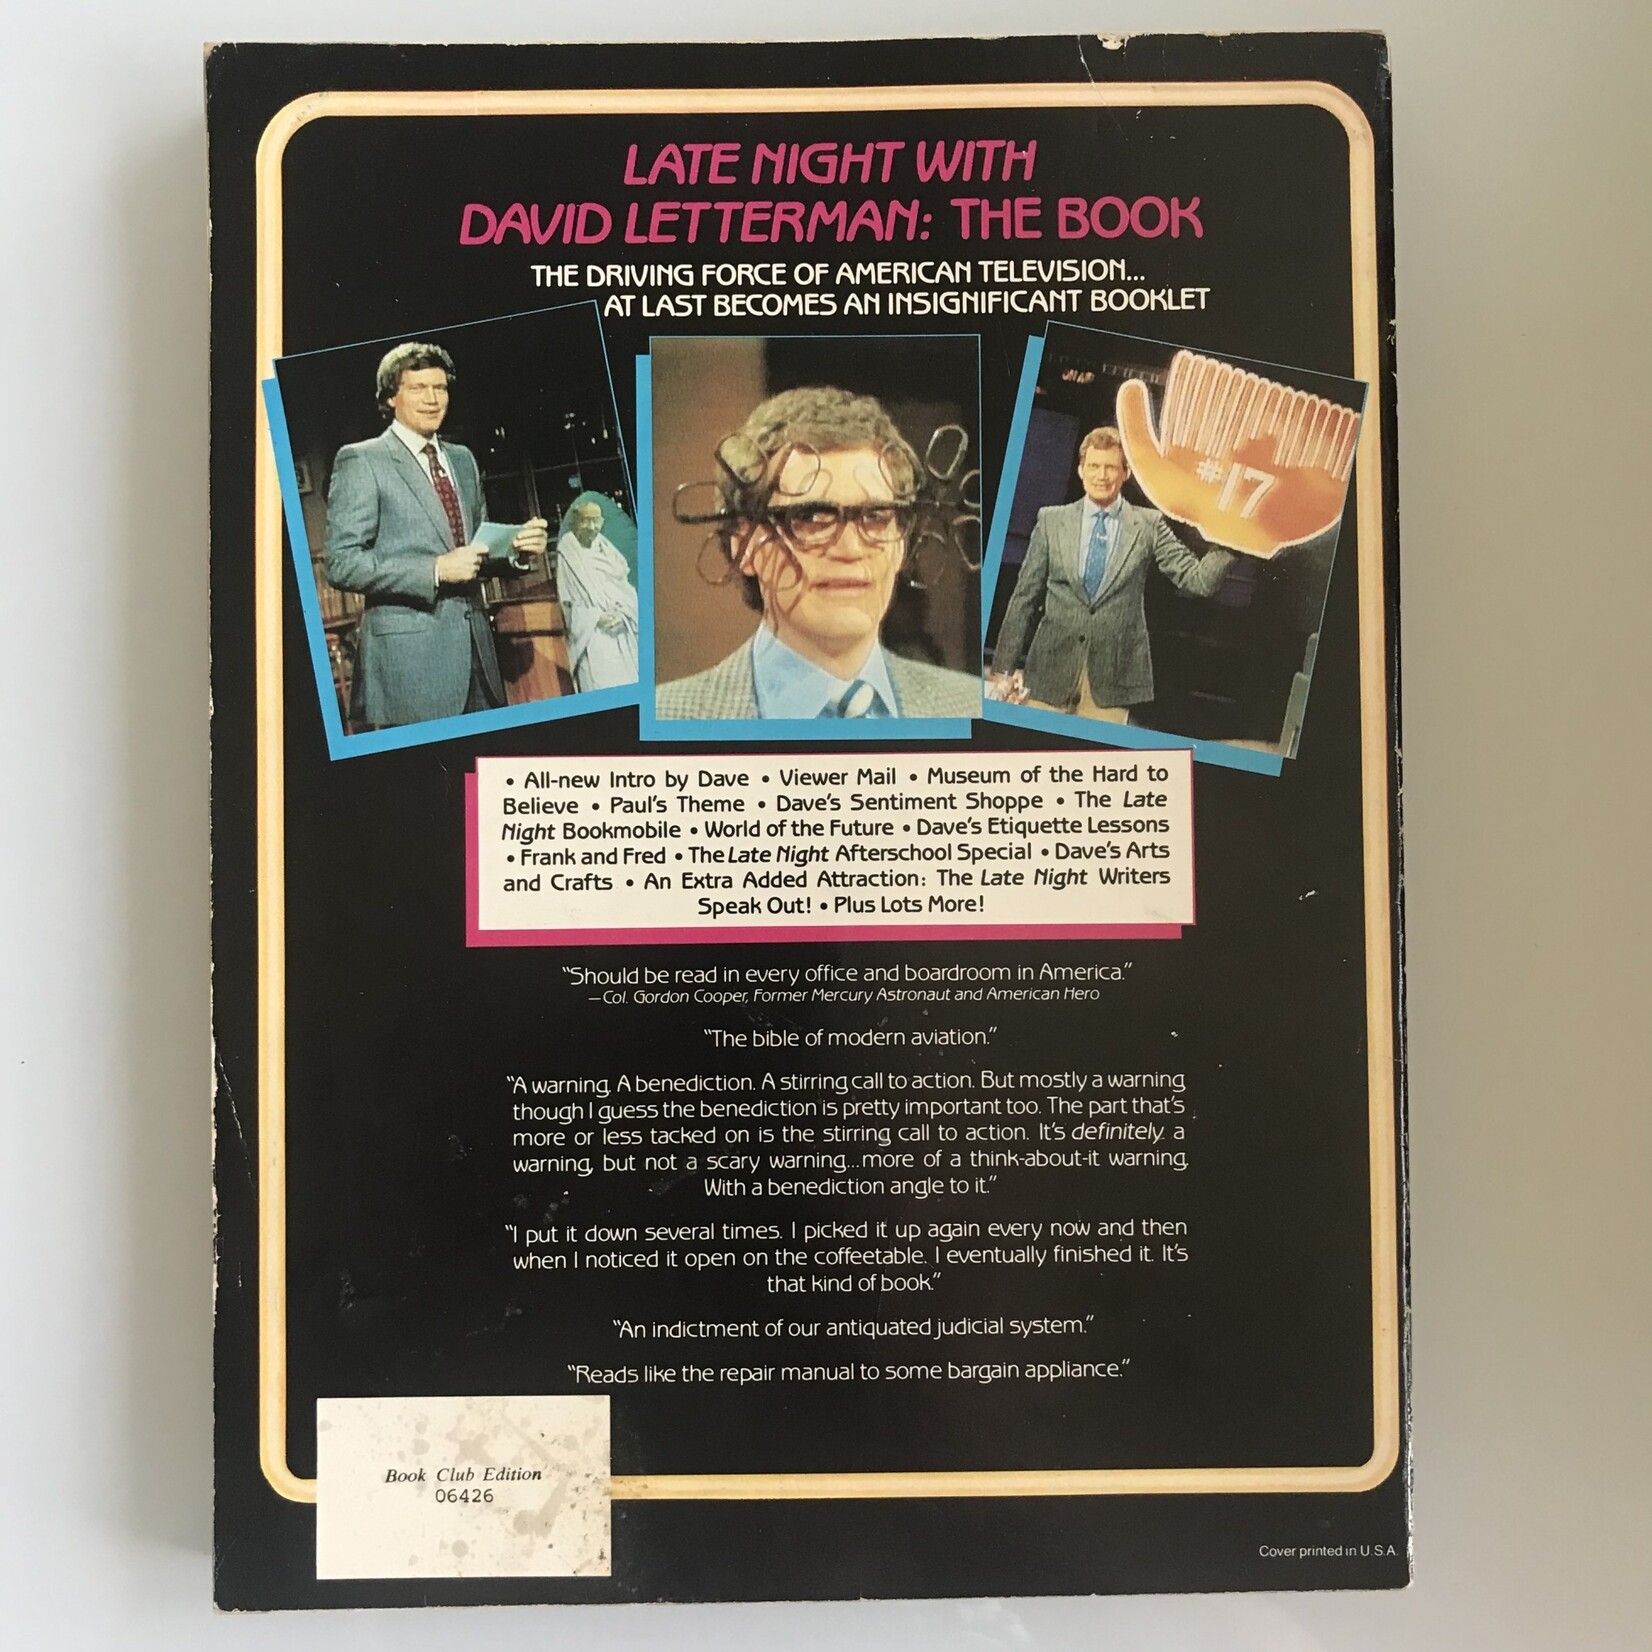 Merrill Markoe (Editor) - Late Night With David Letterman: The Book - Paperback (USED)